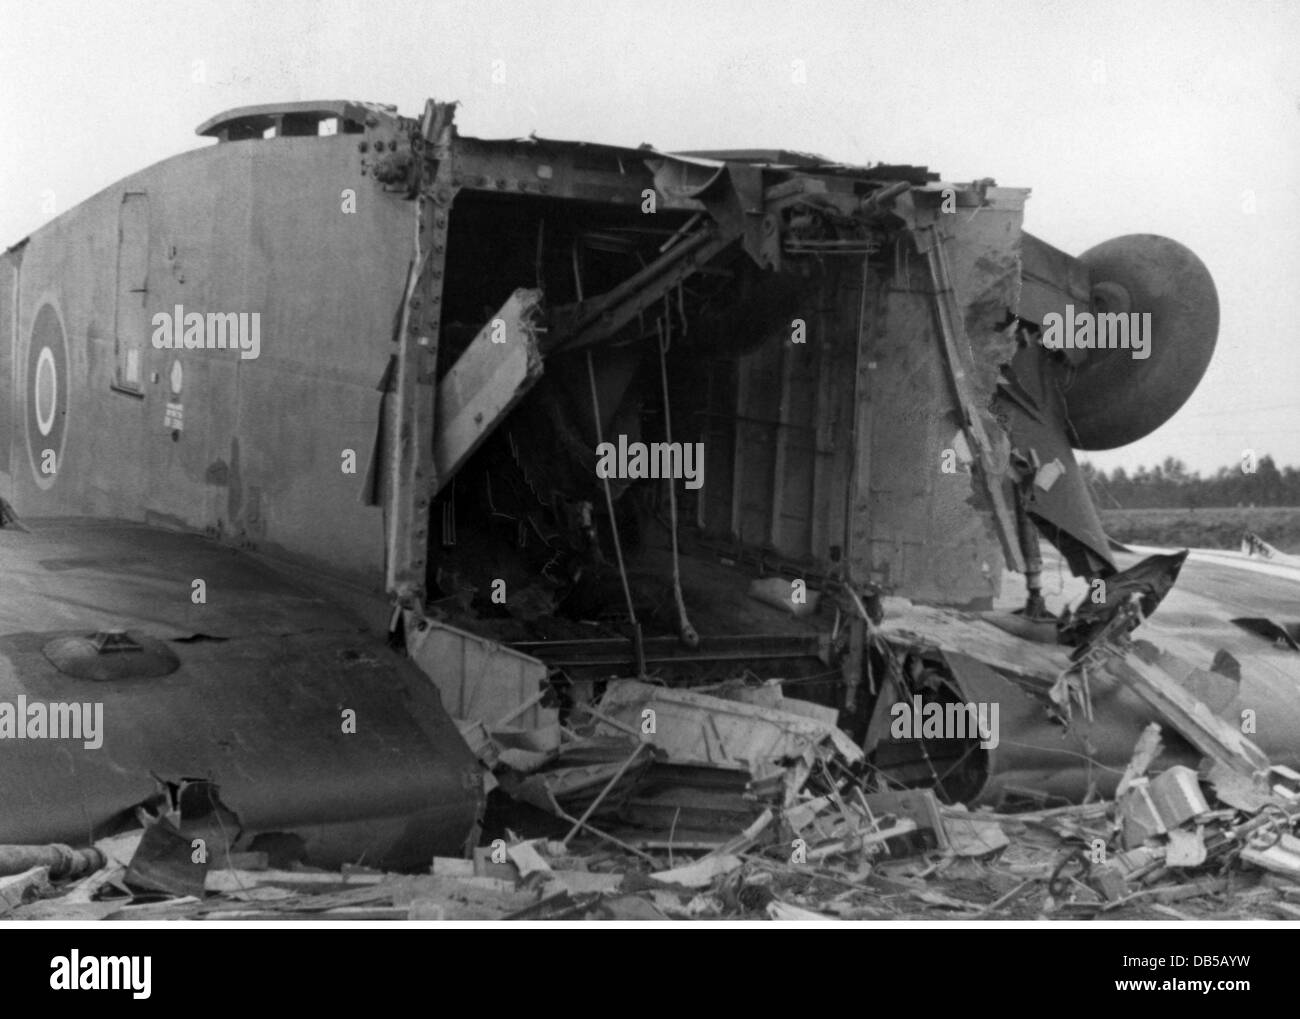 events, Second World War / WWII, Netherlands, Arnhem, 17. - 25.9.1944, crashed Hamilcar military glider of the British 1st Airborne Division (General Urquhart), Heelsum, 17.9.1944, Additional-Rights-Clearences-Not Available Stock Photo